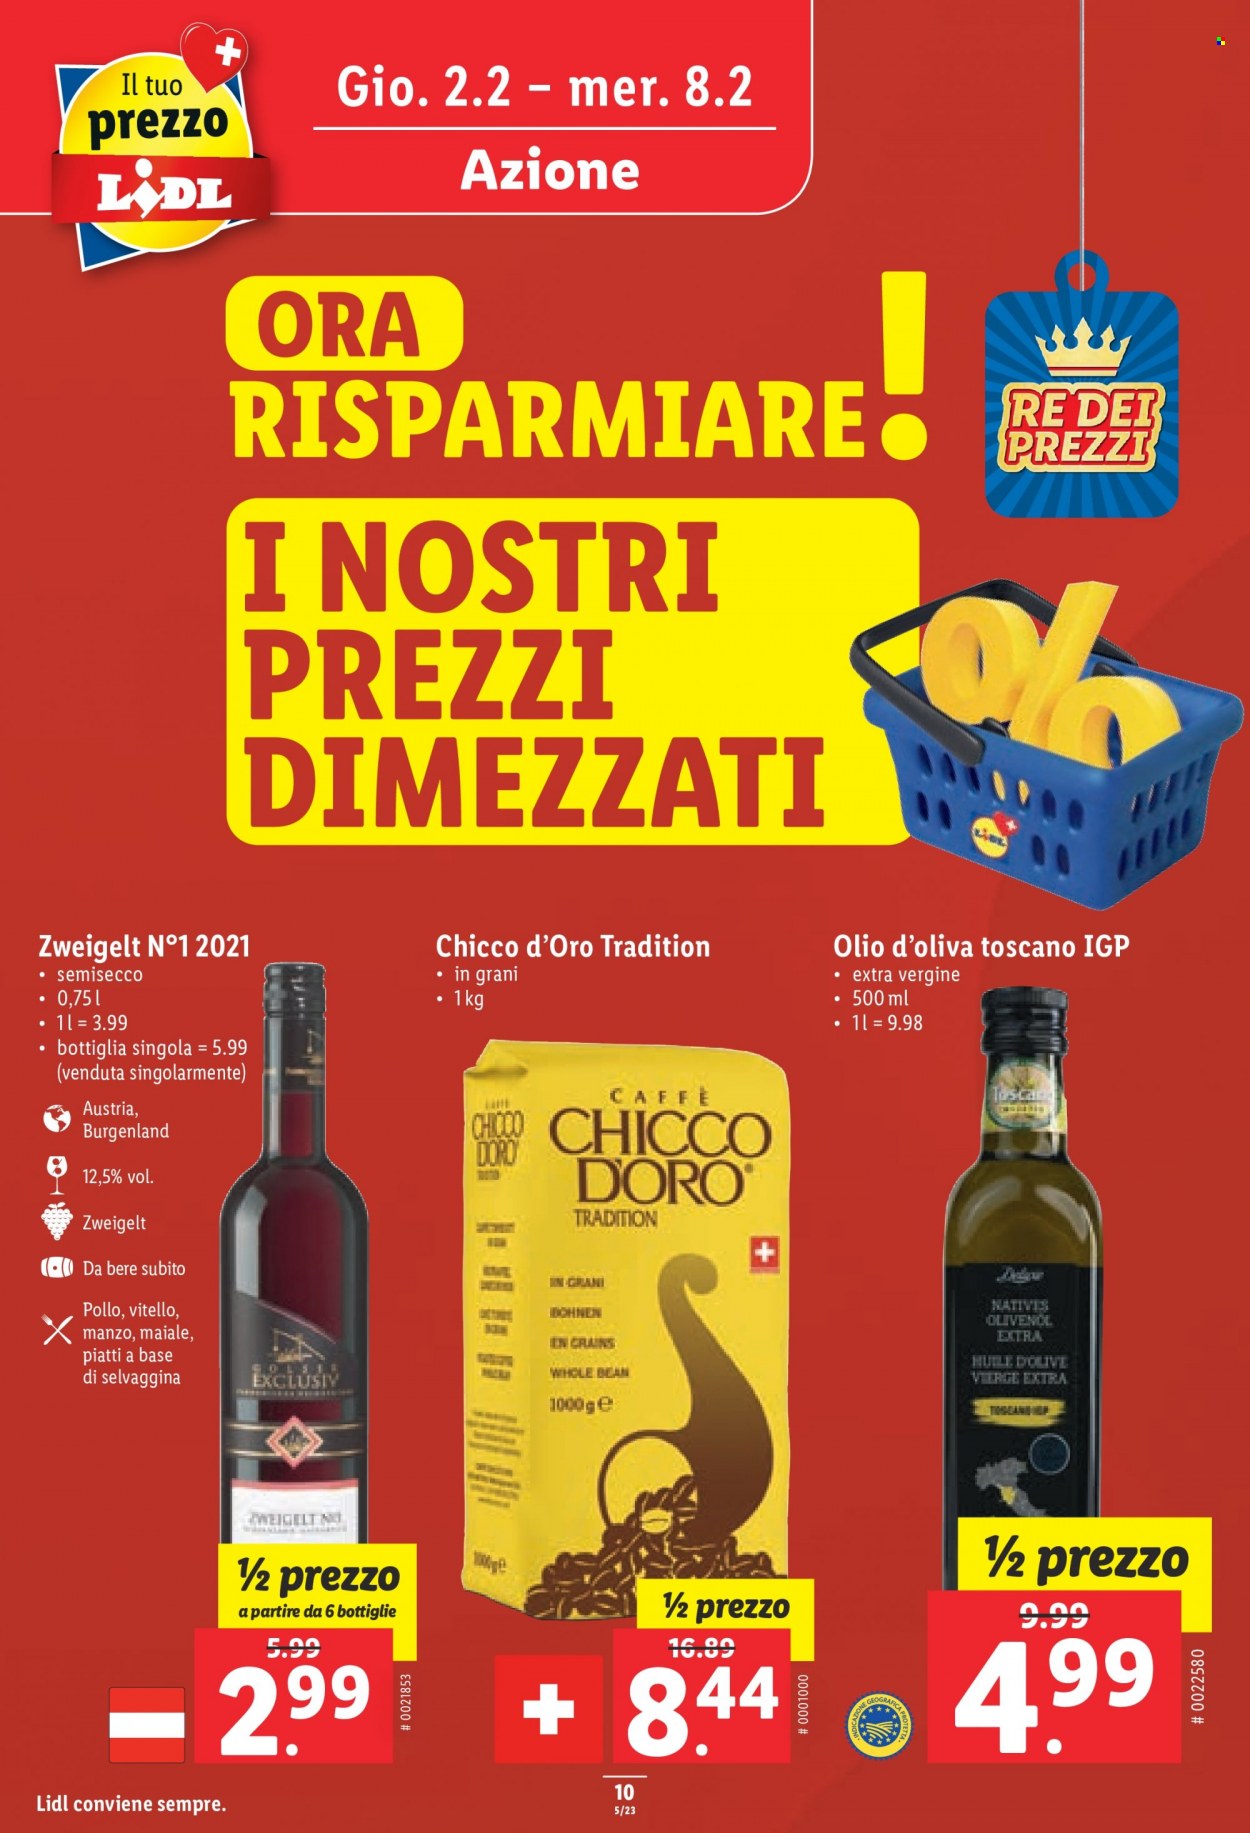 Catalogue Lidl - 2.2.2023 - 8.2.2023. Page 10.